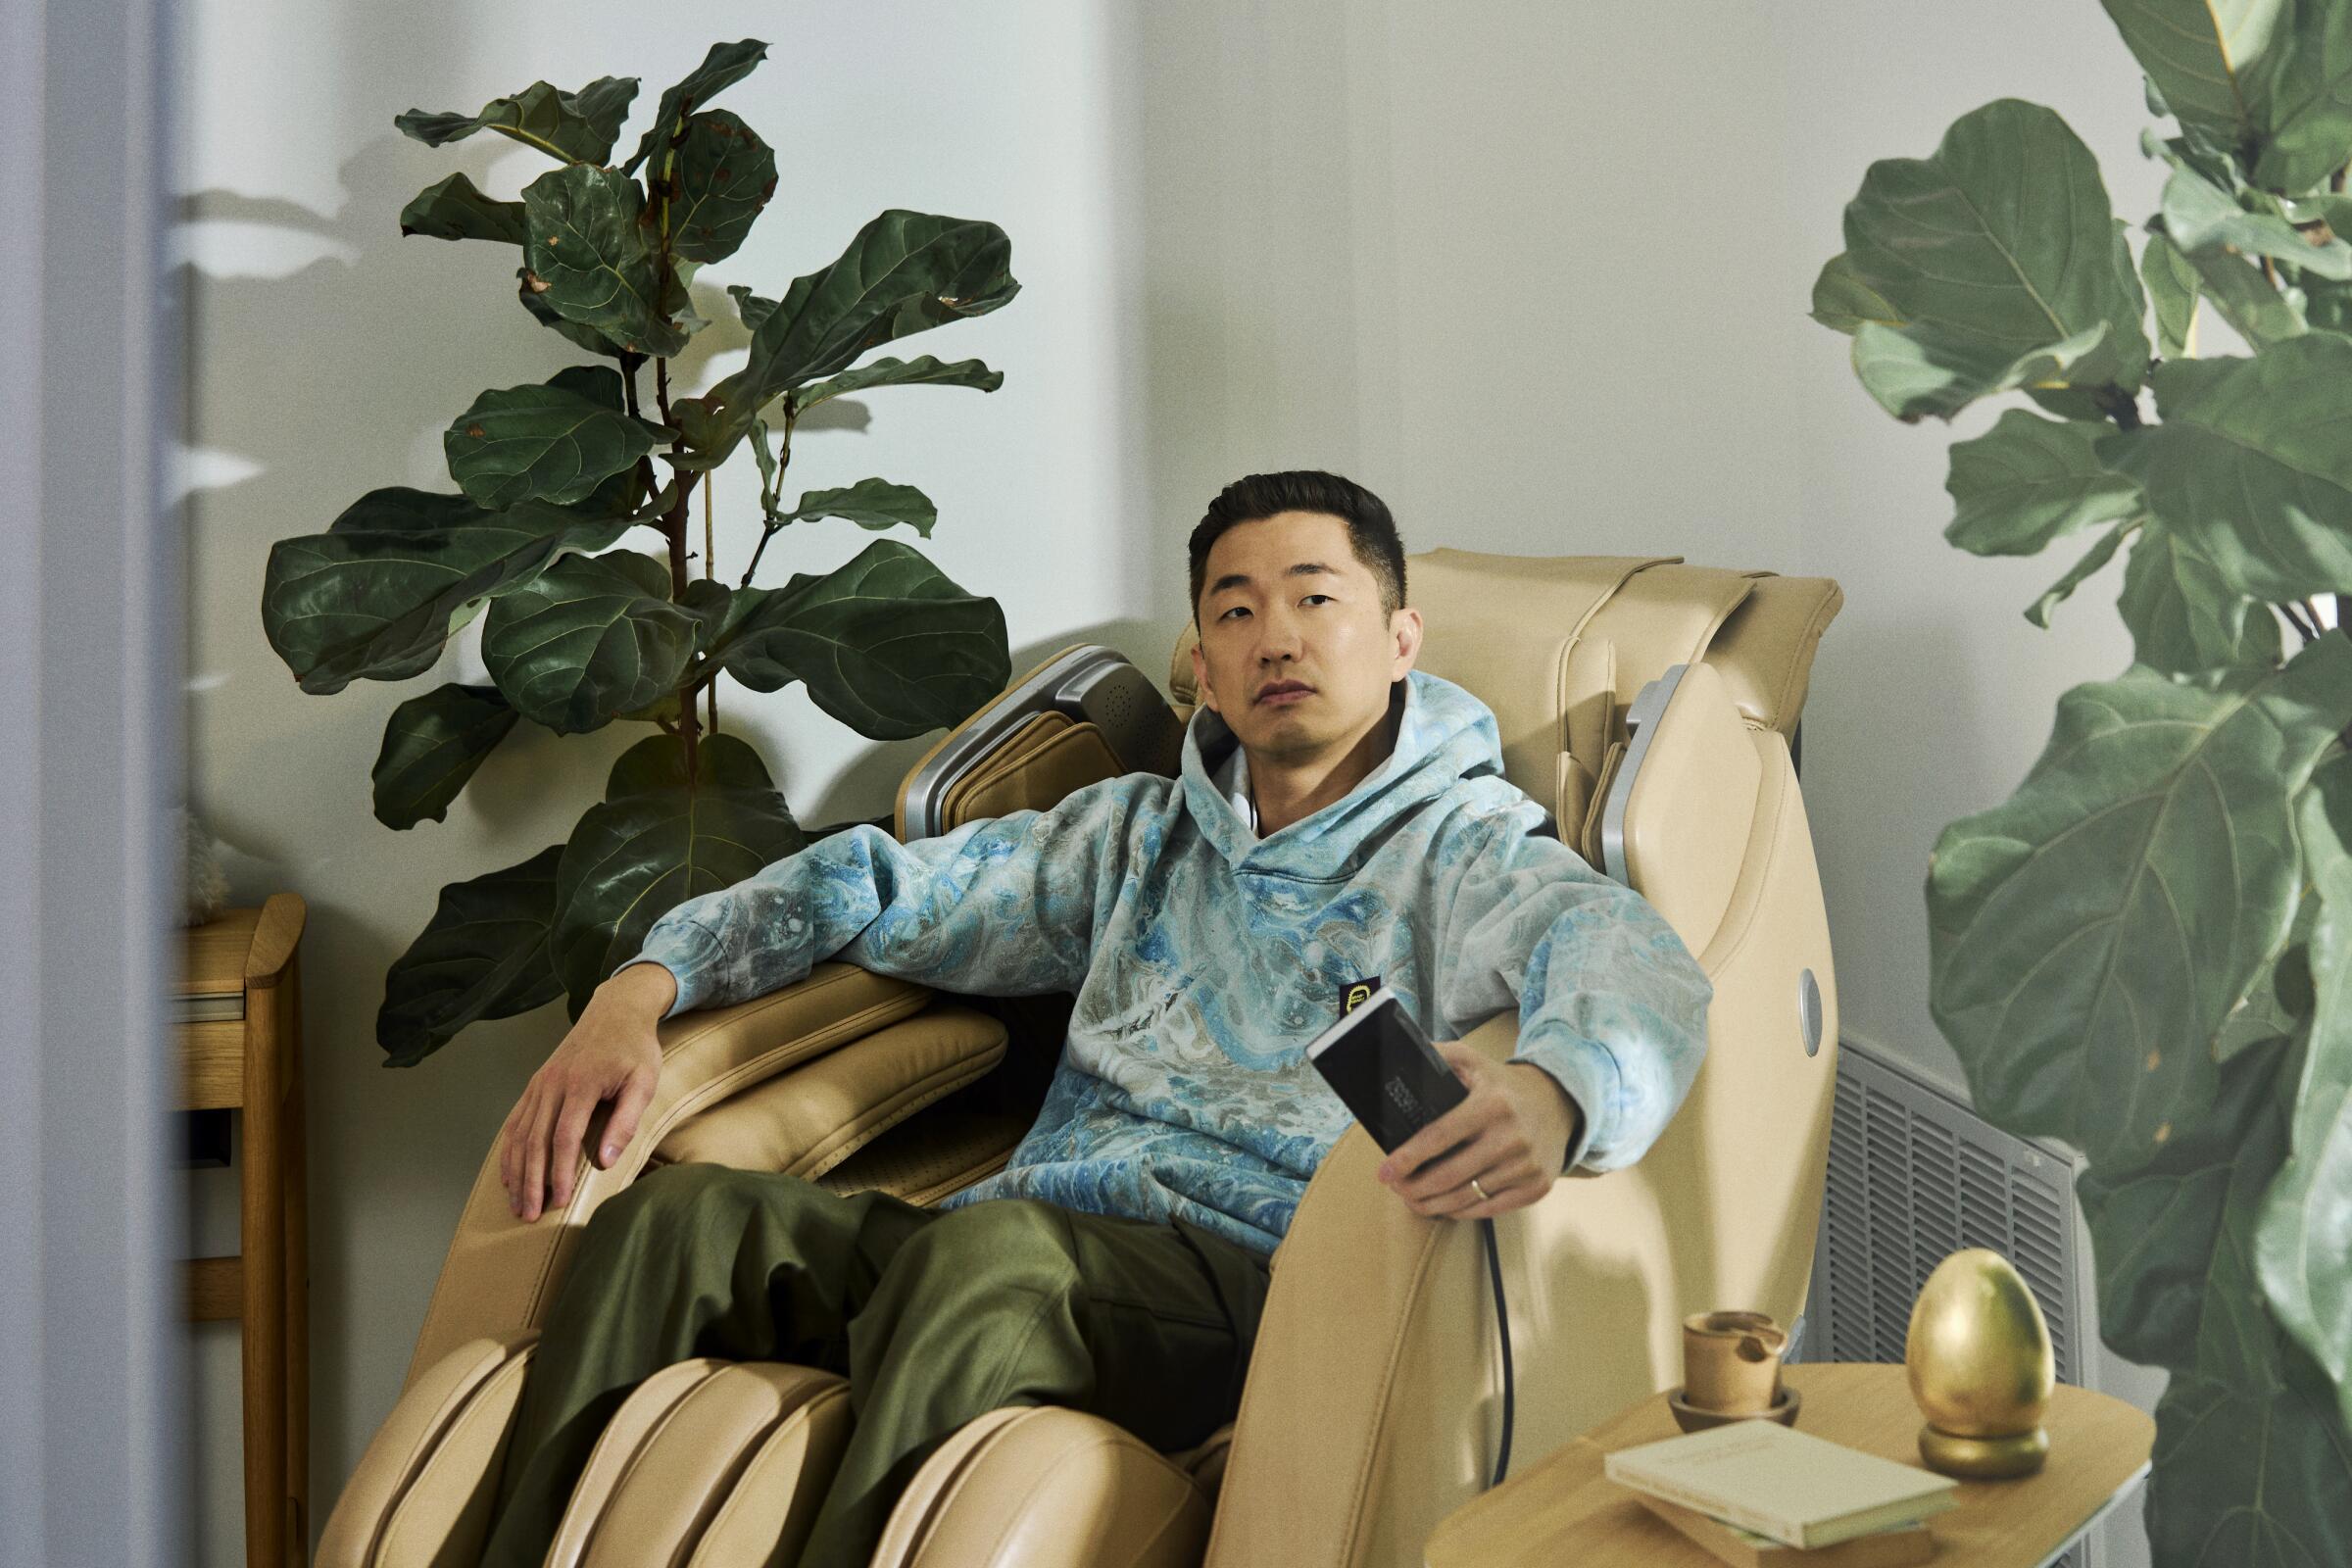 Lee Sung Jin sits in a large massage chair.